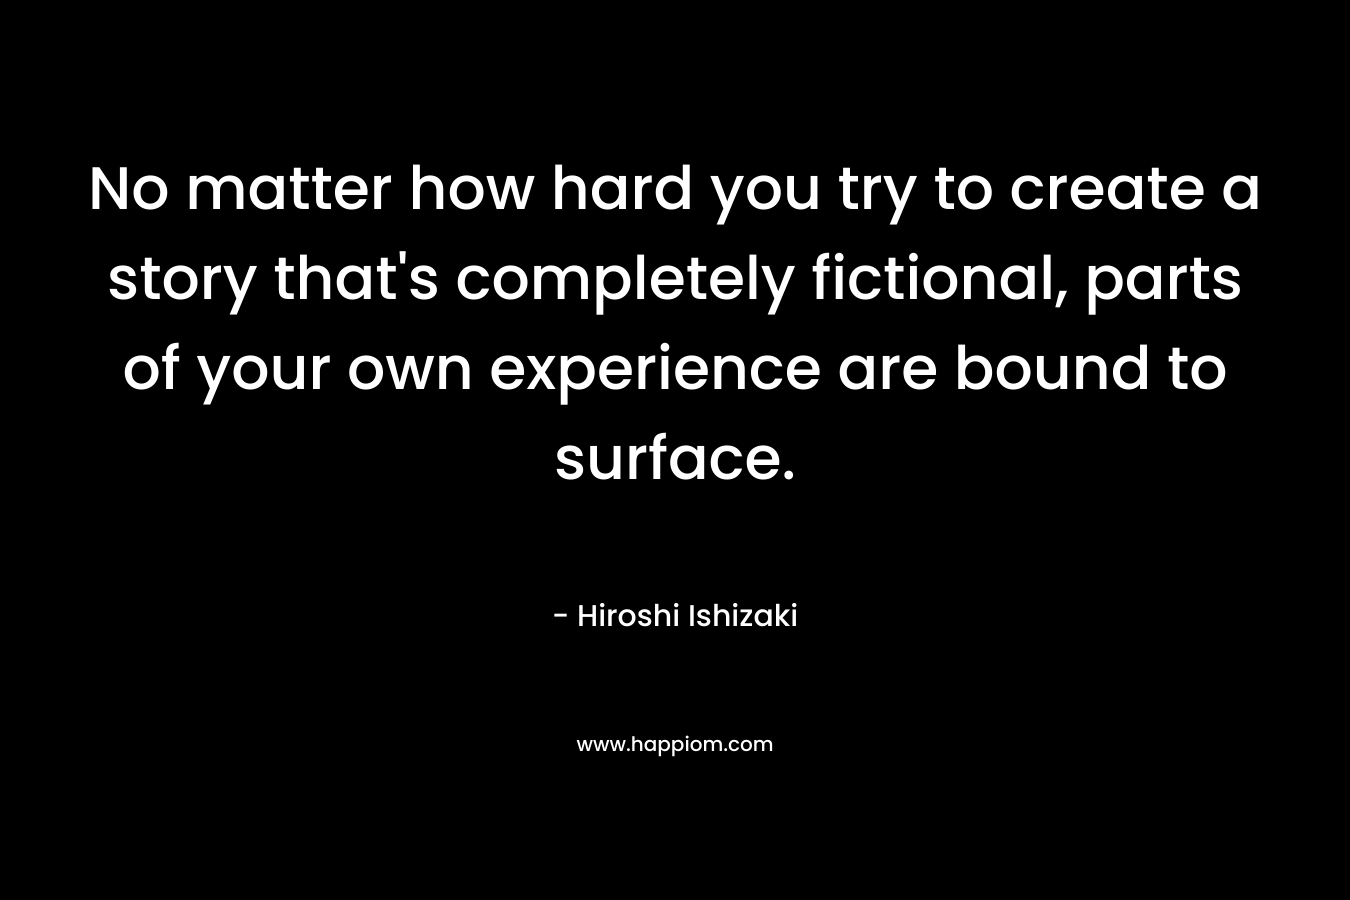 No matter how hard you try to create a story that's completely fictional, parts of your own experience are bound to surface.